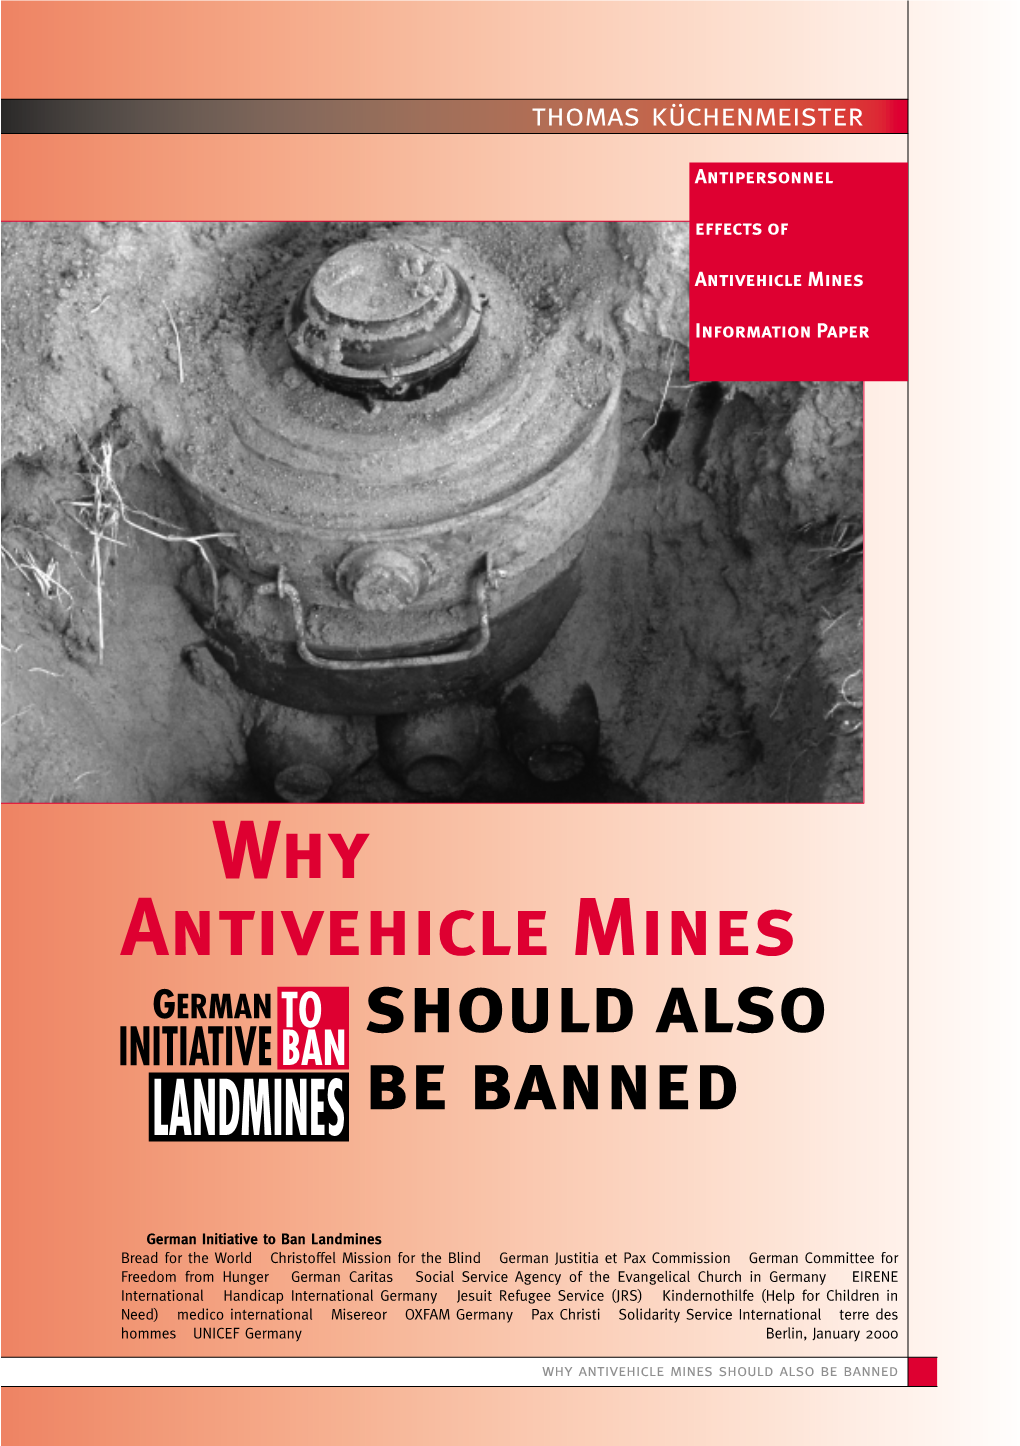 Why Antivehicle Mines Should Also Be Banned